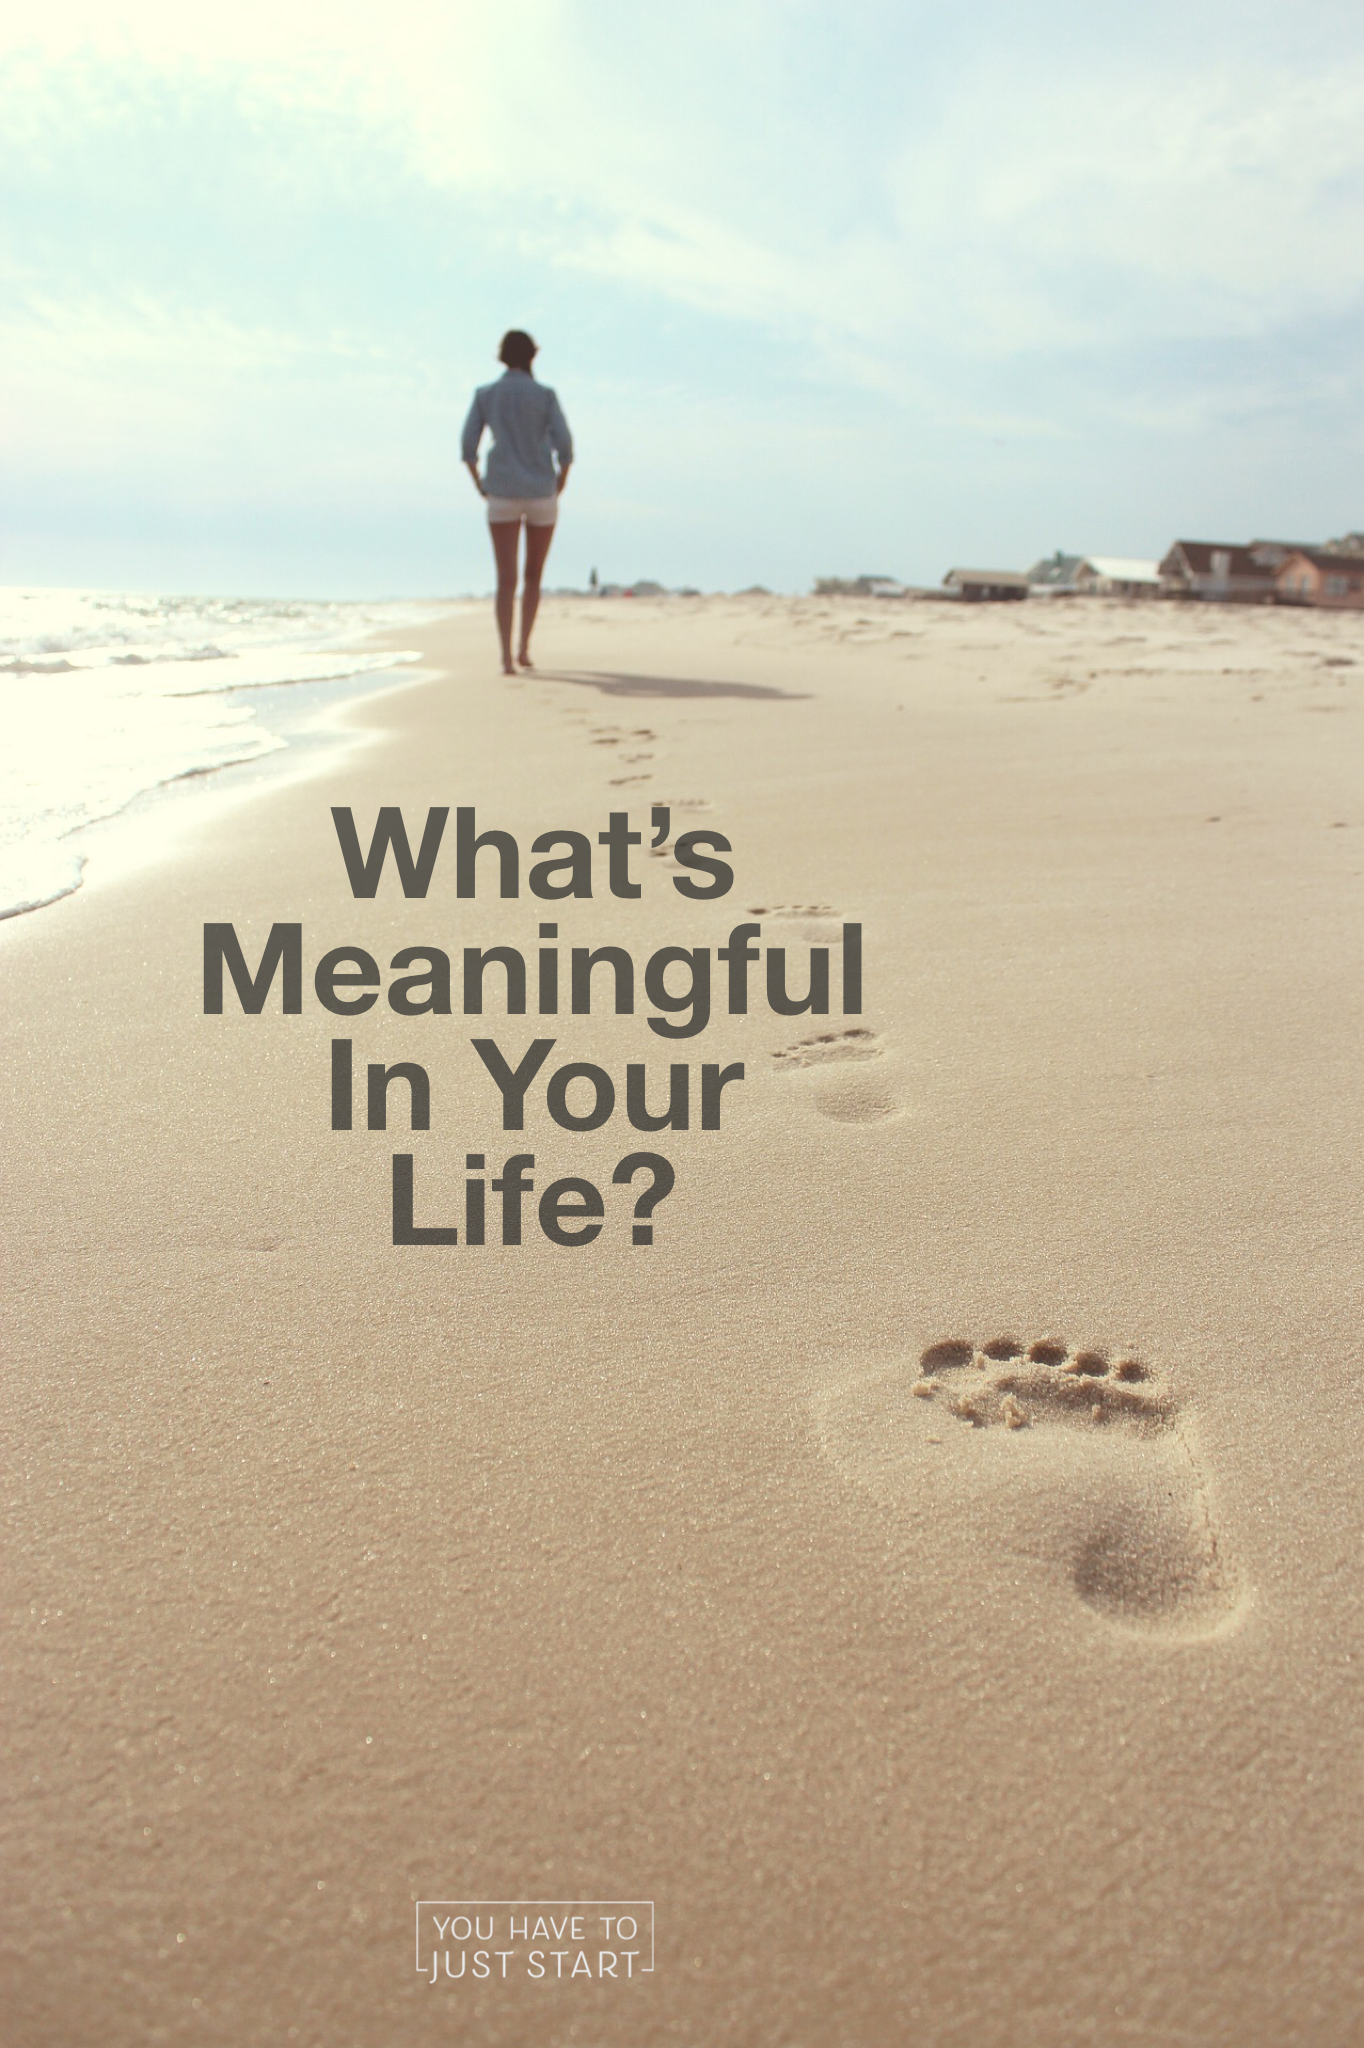 What's Meaningful in Your Life?